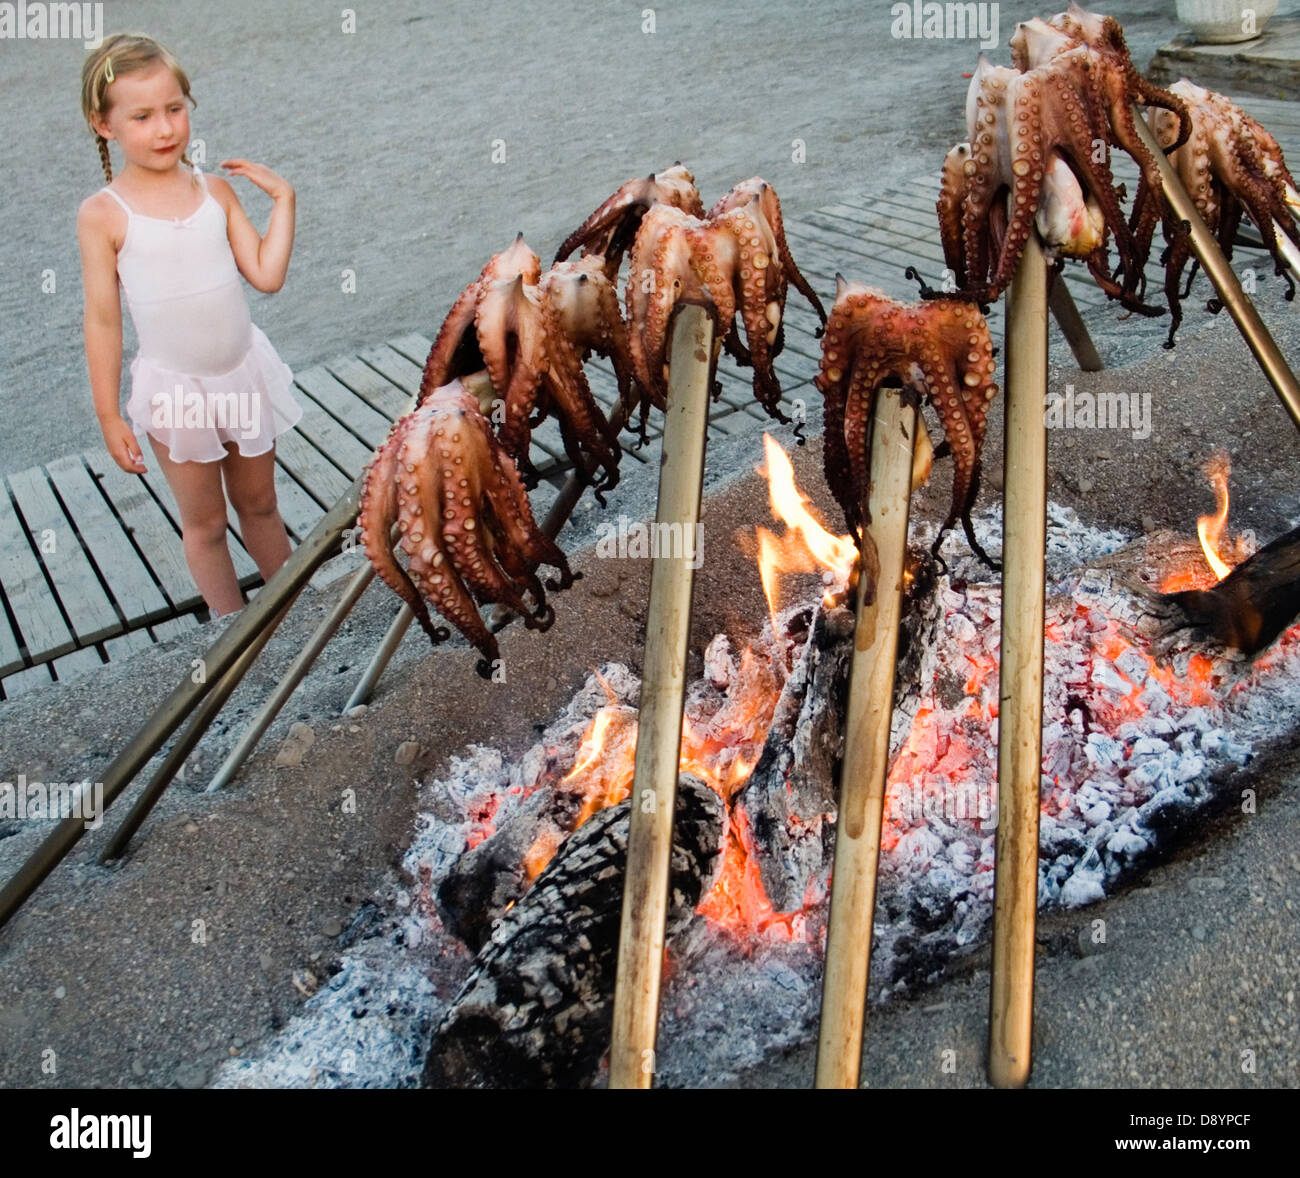 A girl standing by cuttle-fish being grilled. Stock Photo